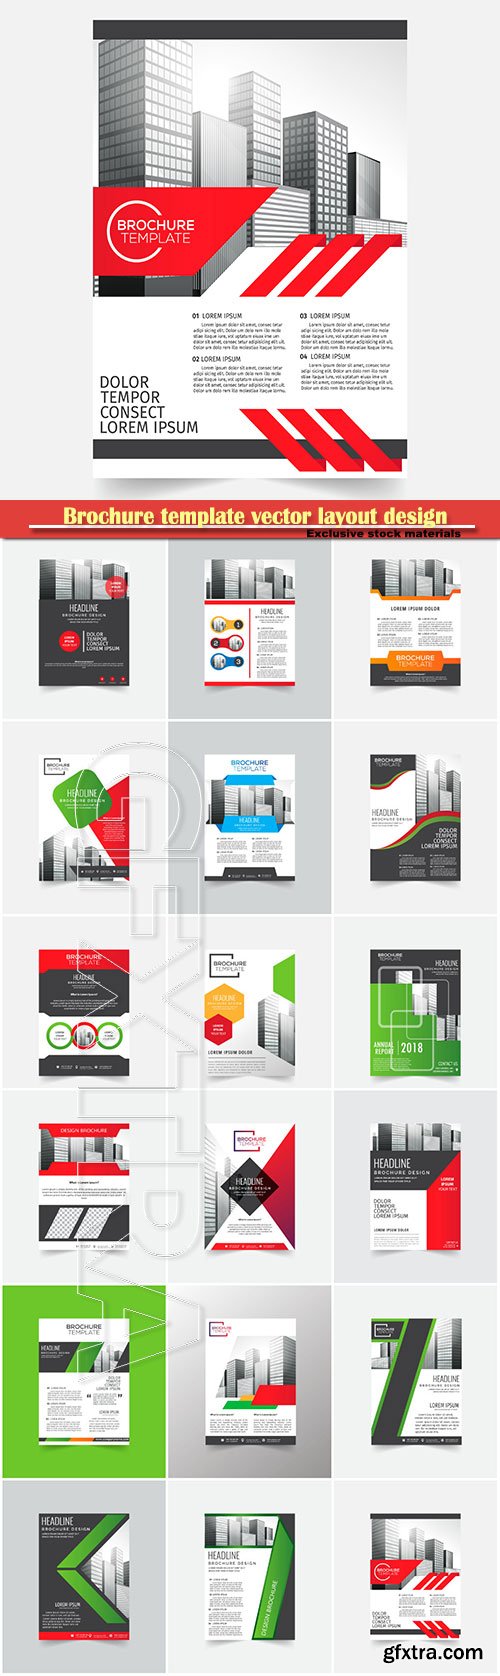 Brochure template vector layout design, corporate business annual report, magazine, flyer mockup # 108